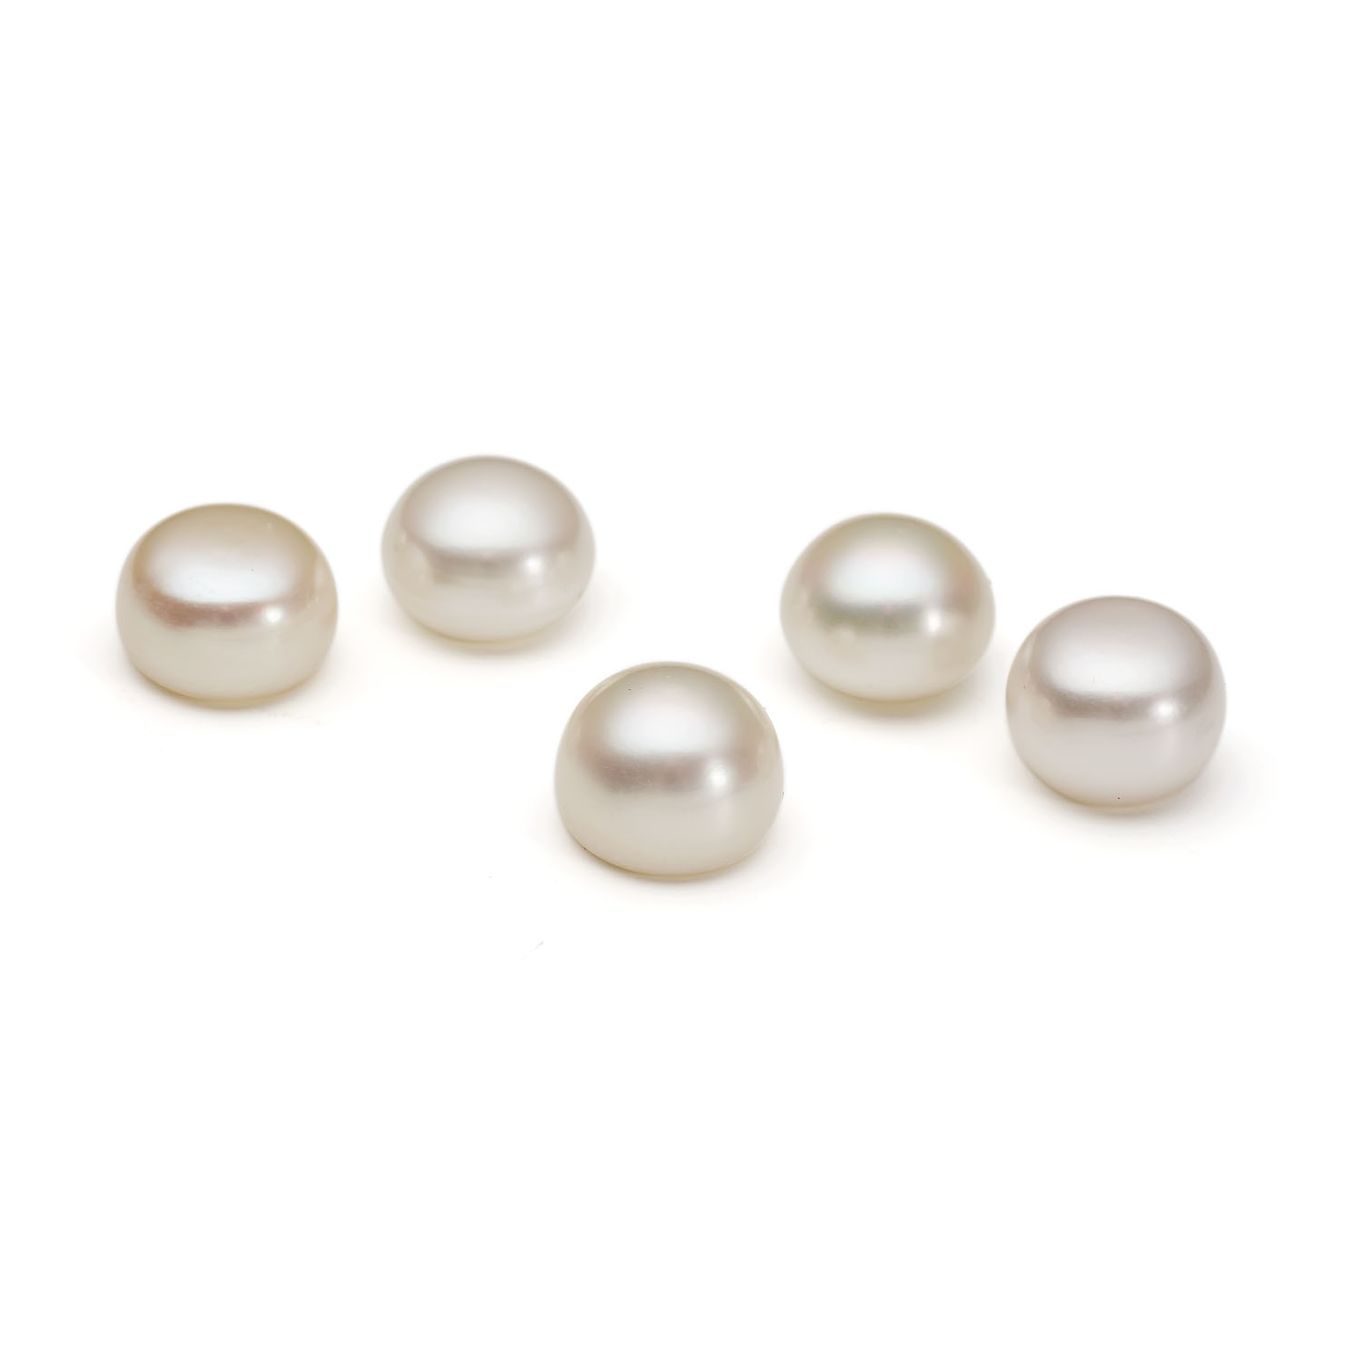 Cultured Freshwater Half Drilled White Pearls - Approx From 10mm Button Shape